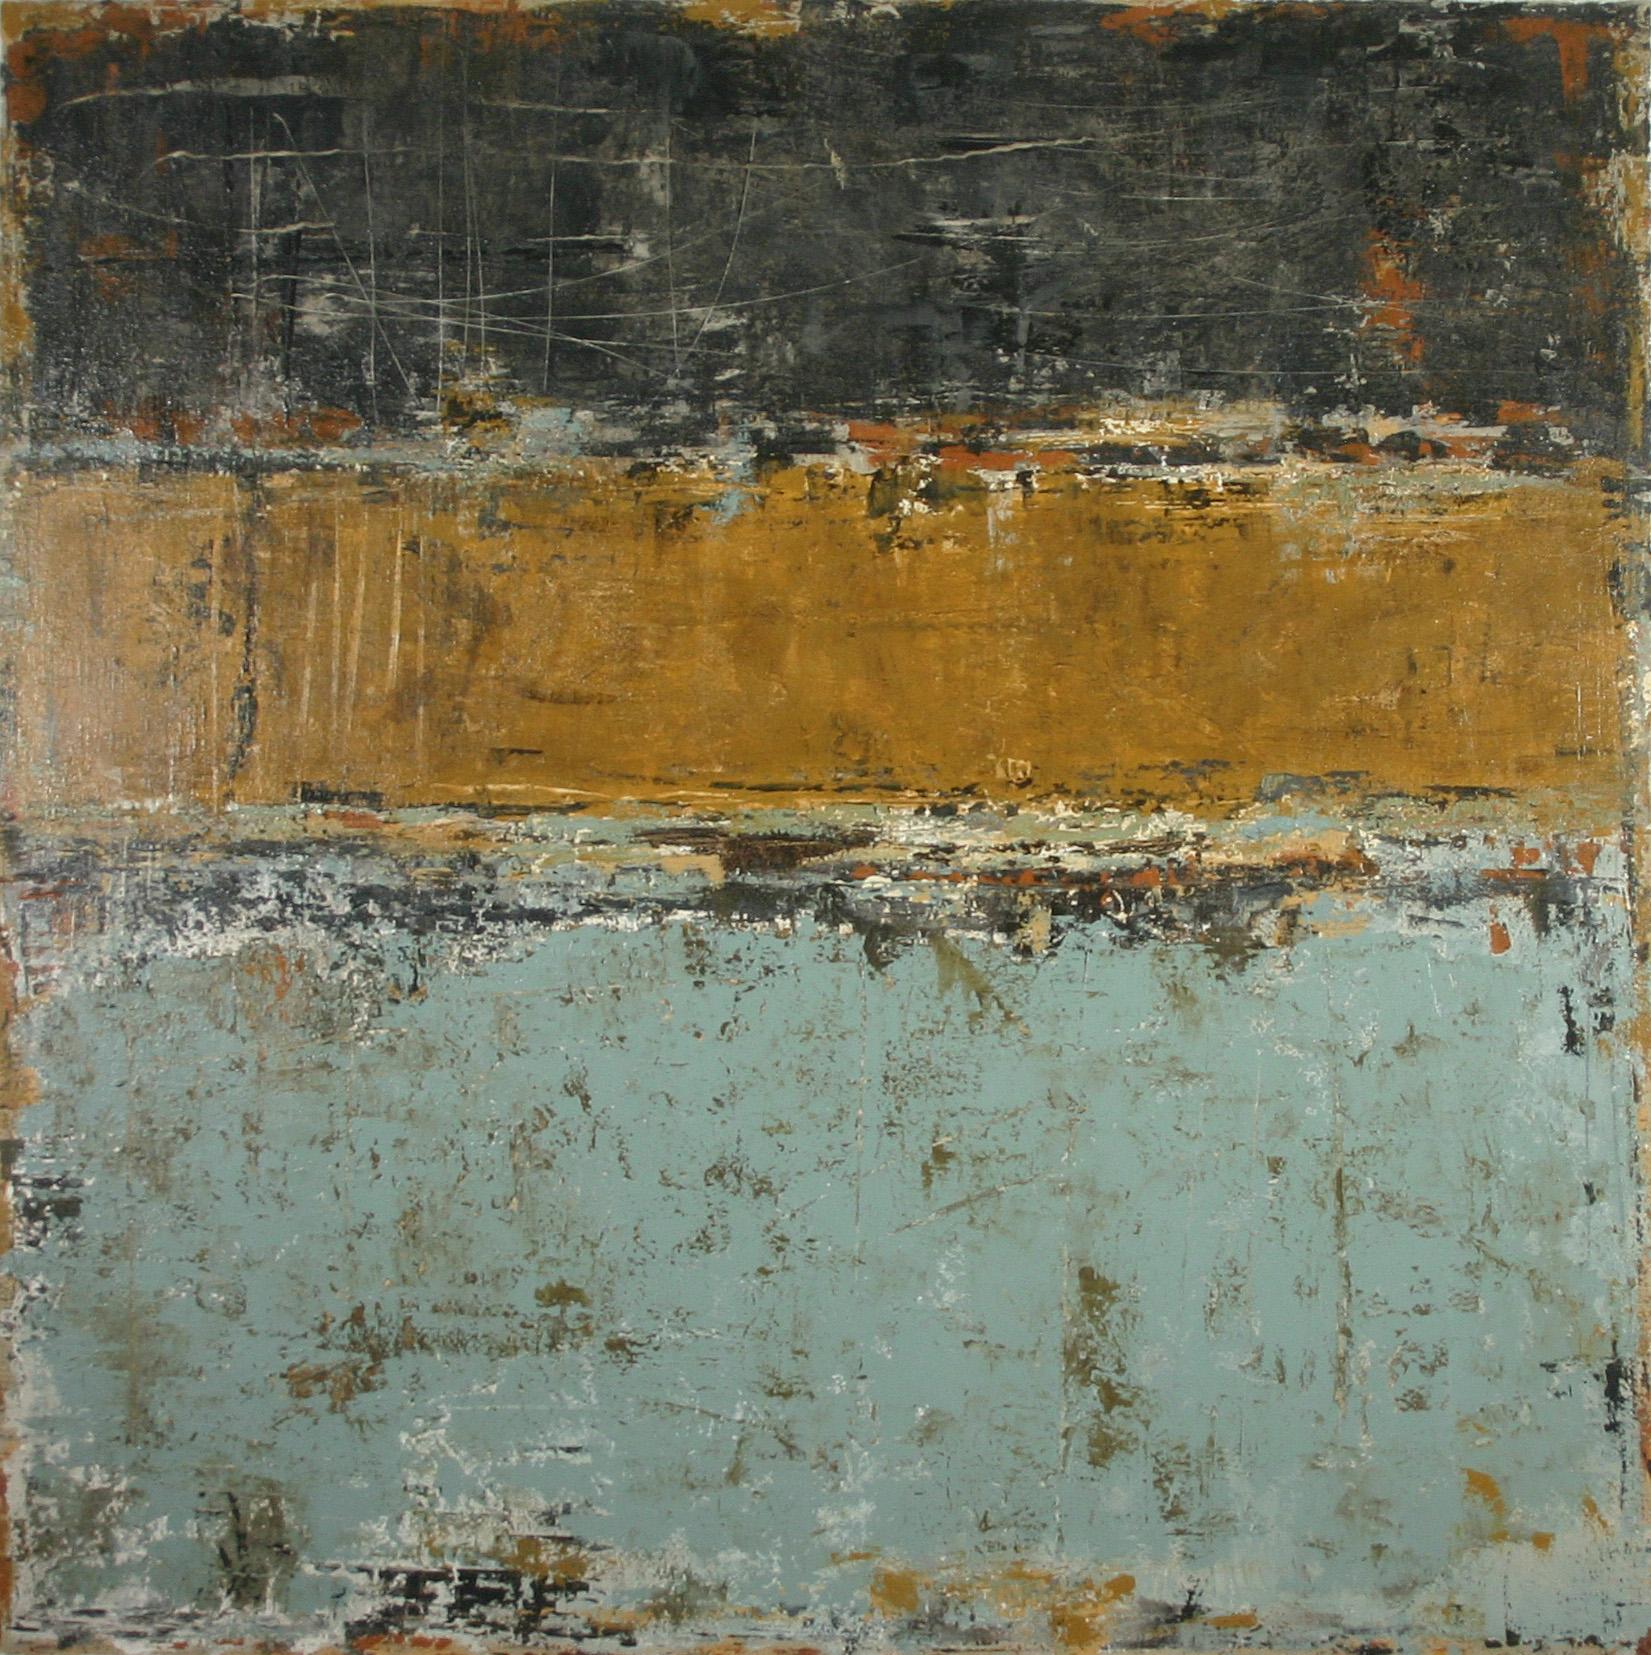 <p>Artist Comments<br />Patricia builds her compositions intuitively with palette knives, blending colors and developing texture directly on the surface of her panels. She says this painting started out in this way, but something was trying to speak